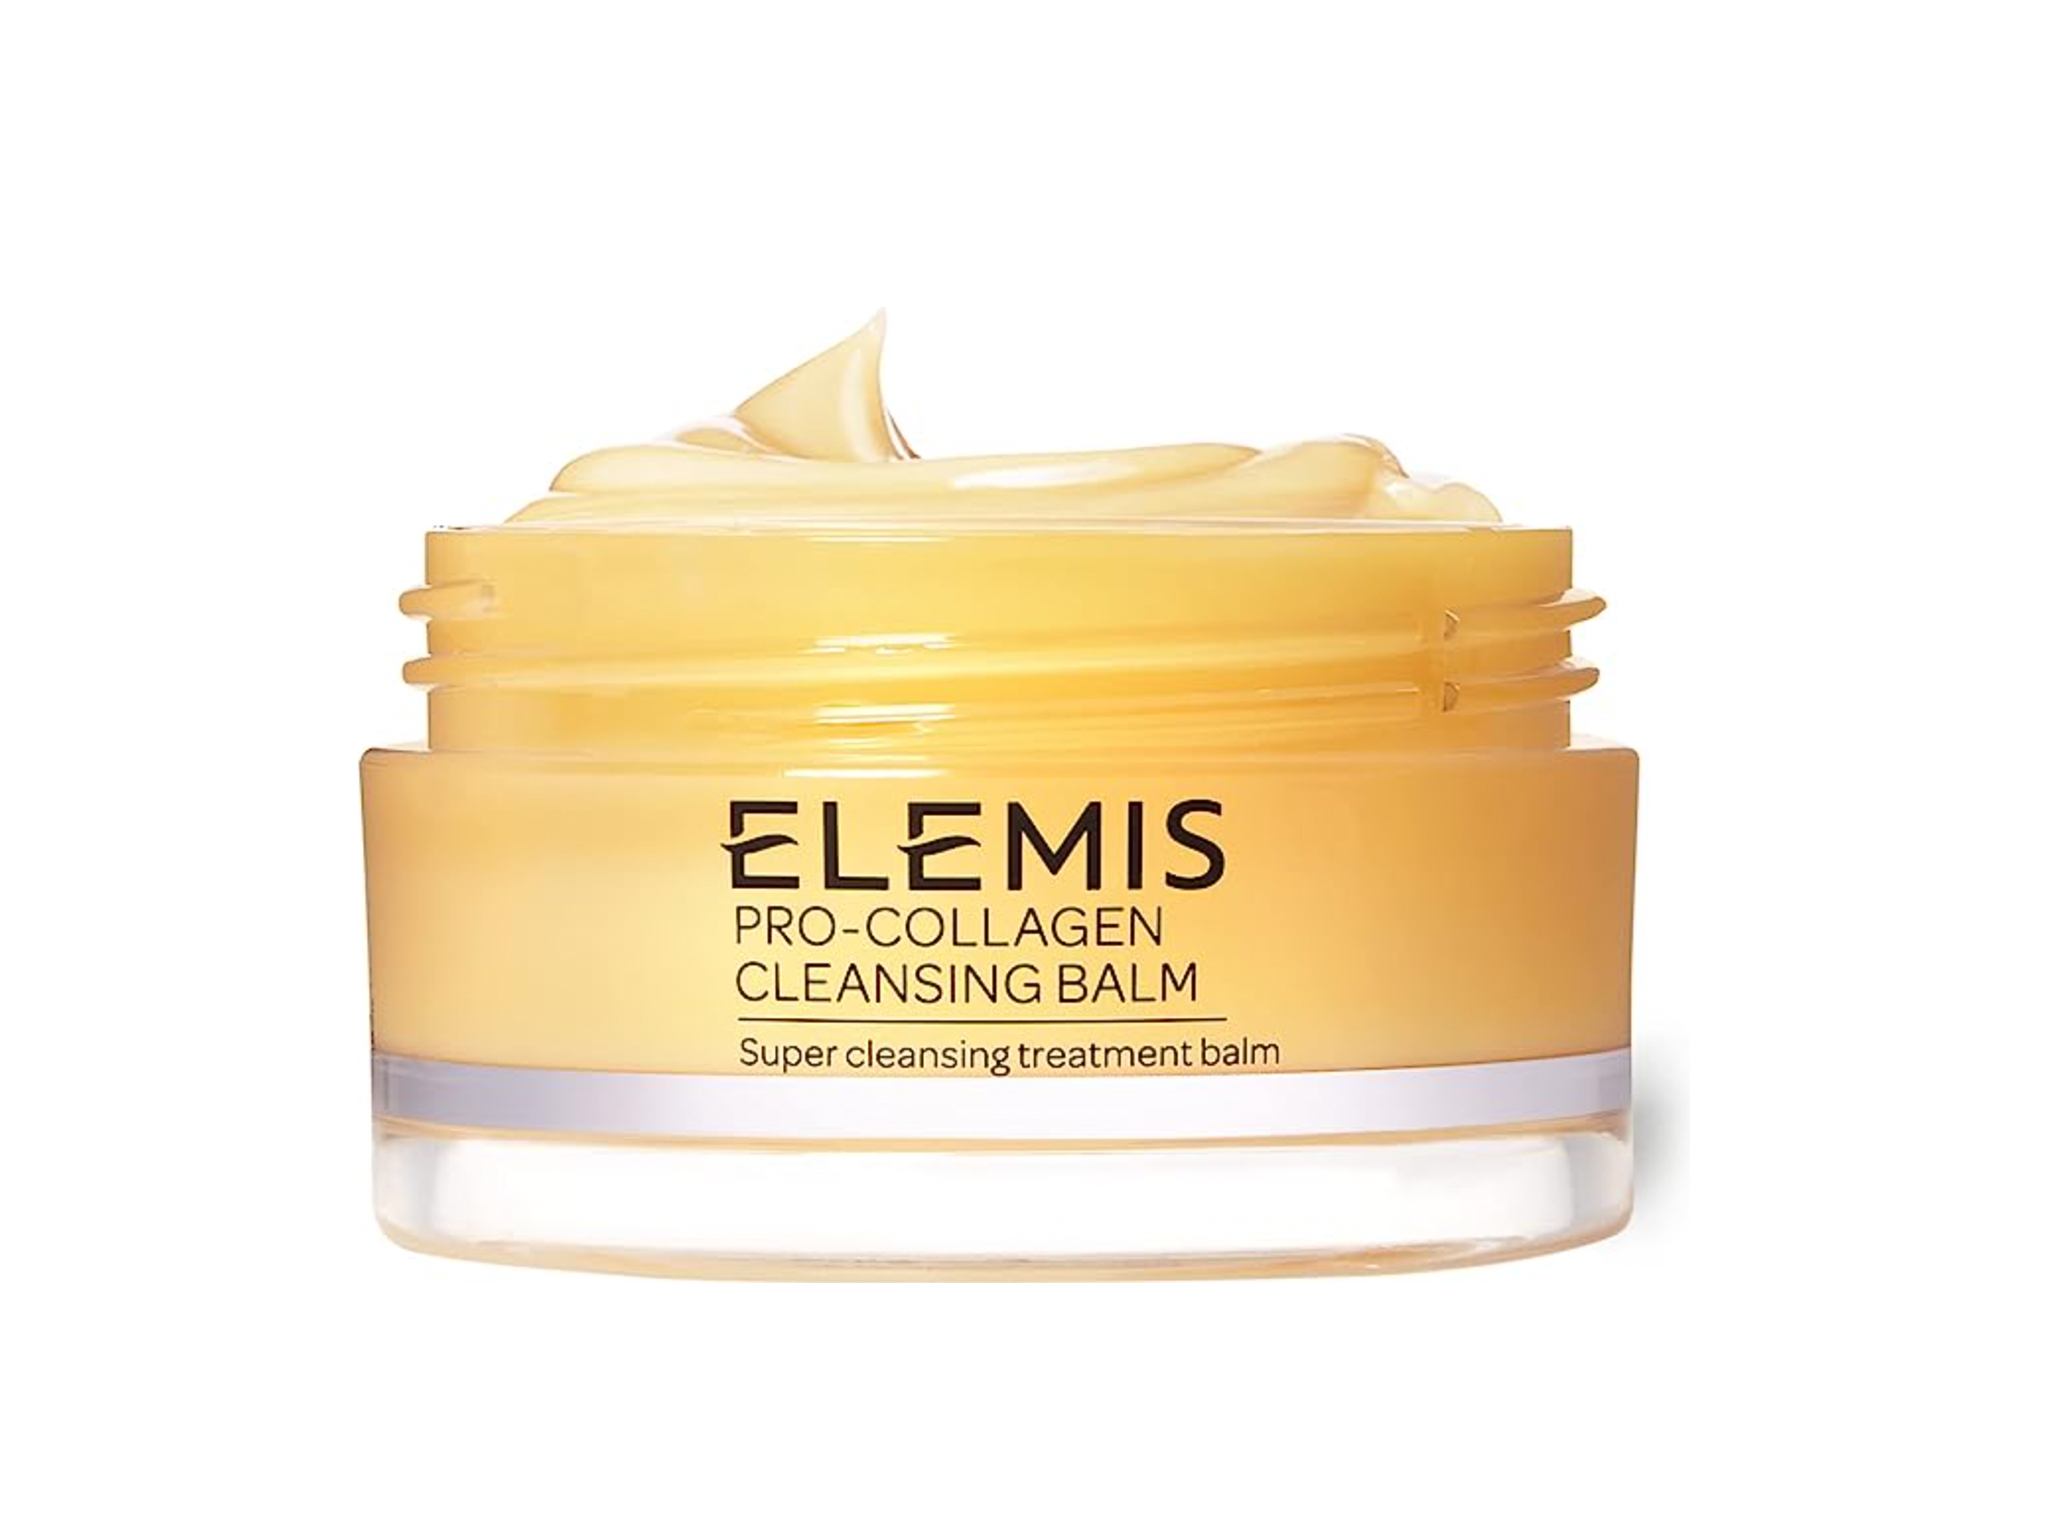 skincare, indybest, cyber monday, black friday, the viral elemis pro-collagen cleansing balm has 25 per cent off for black friday